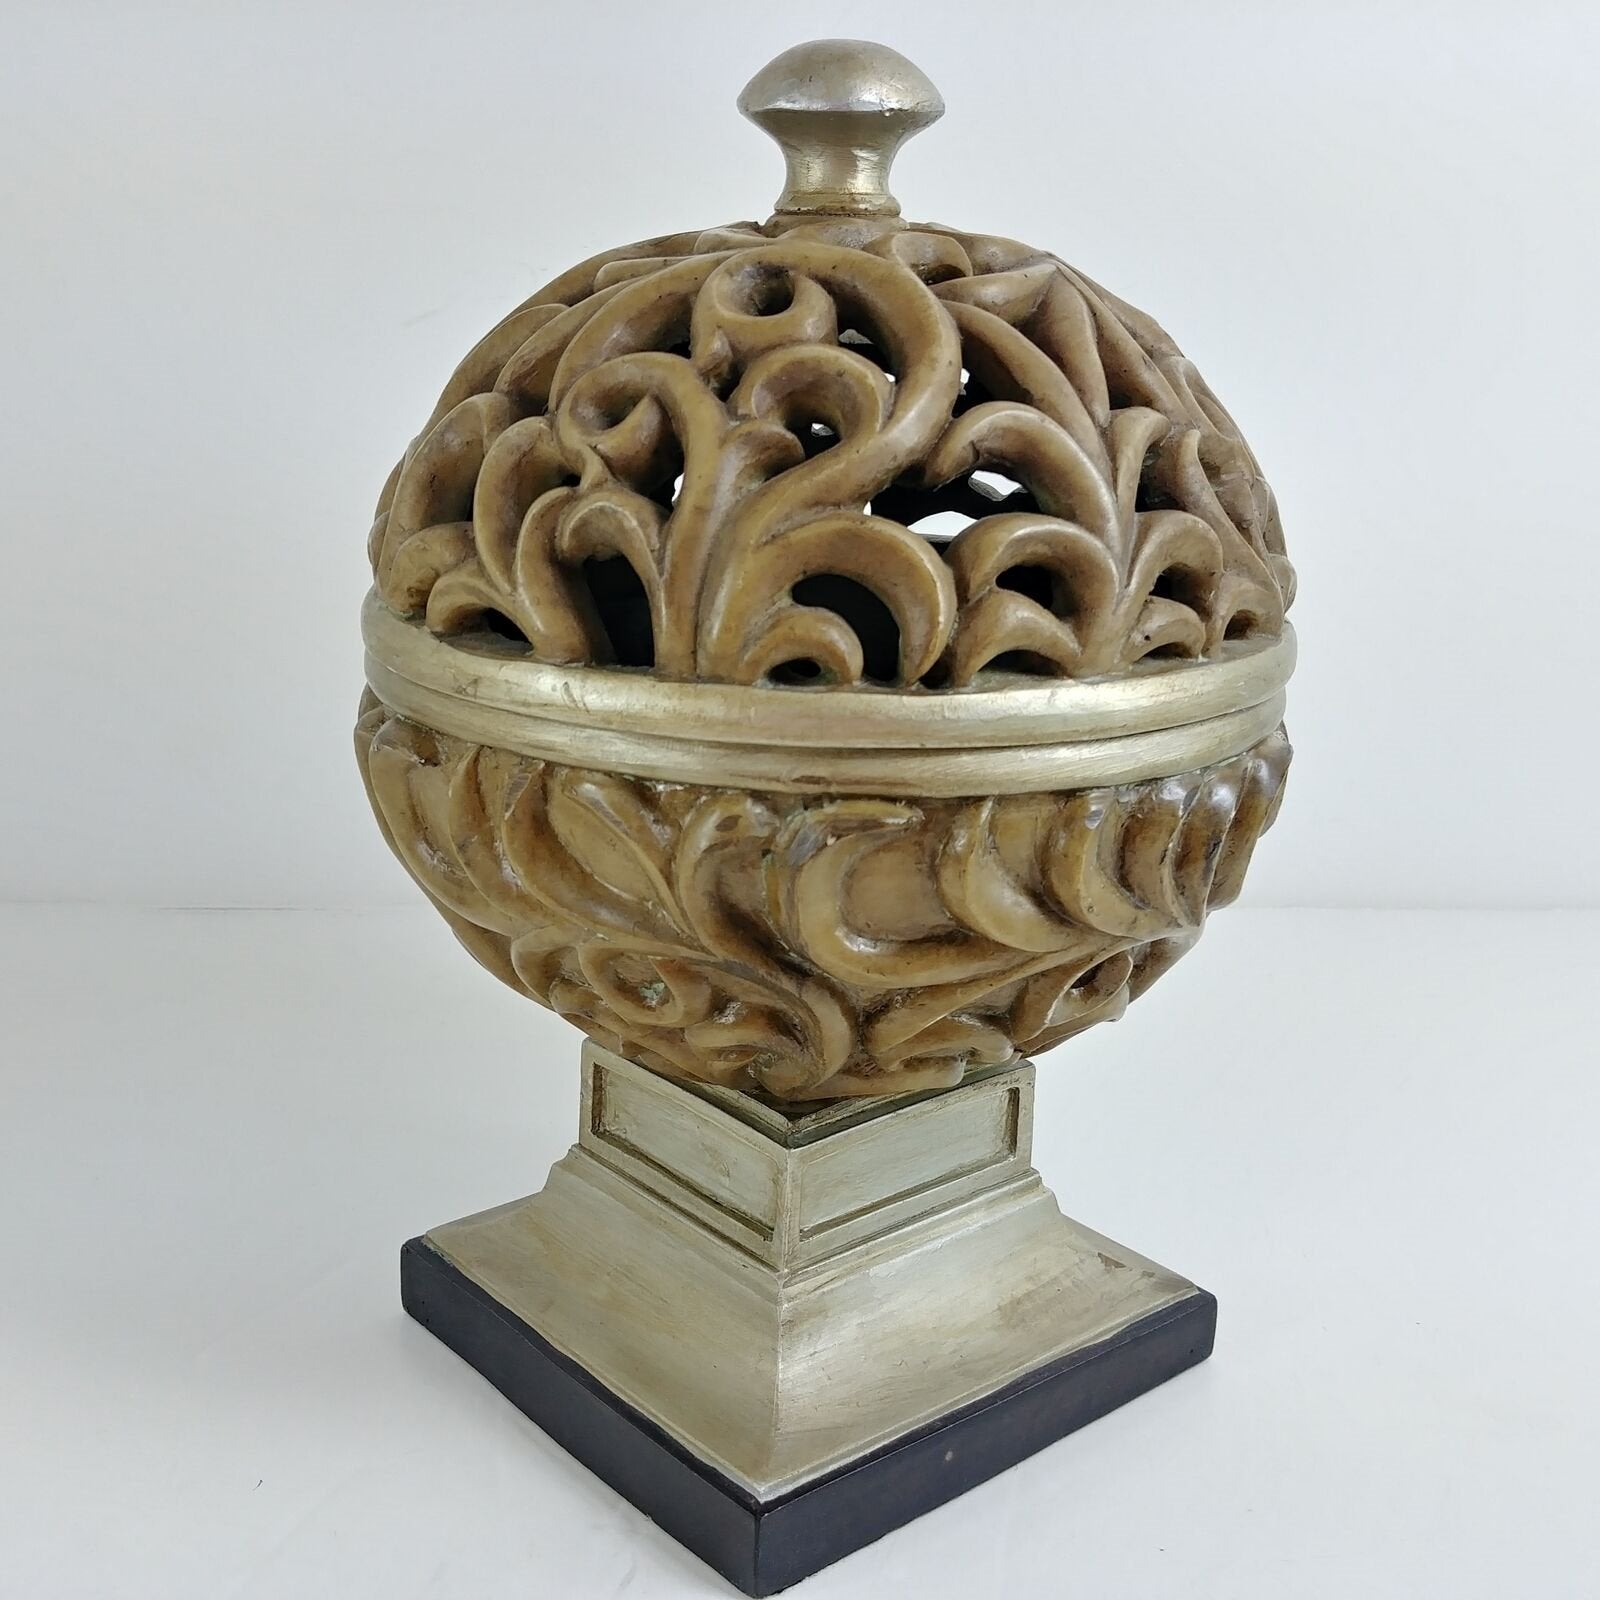 Decorative Sphere Orb with Scroll Work Removable Lid with Storage